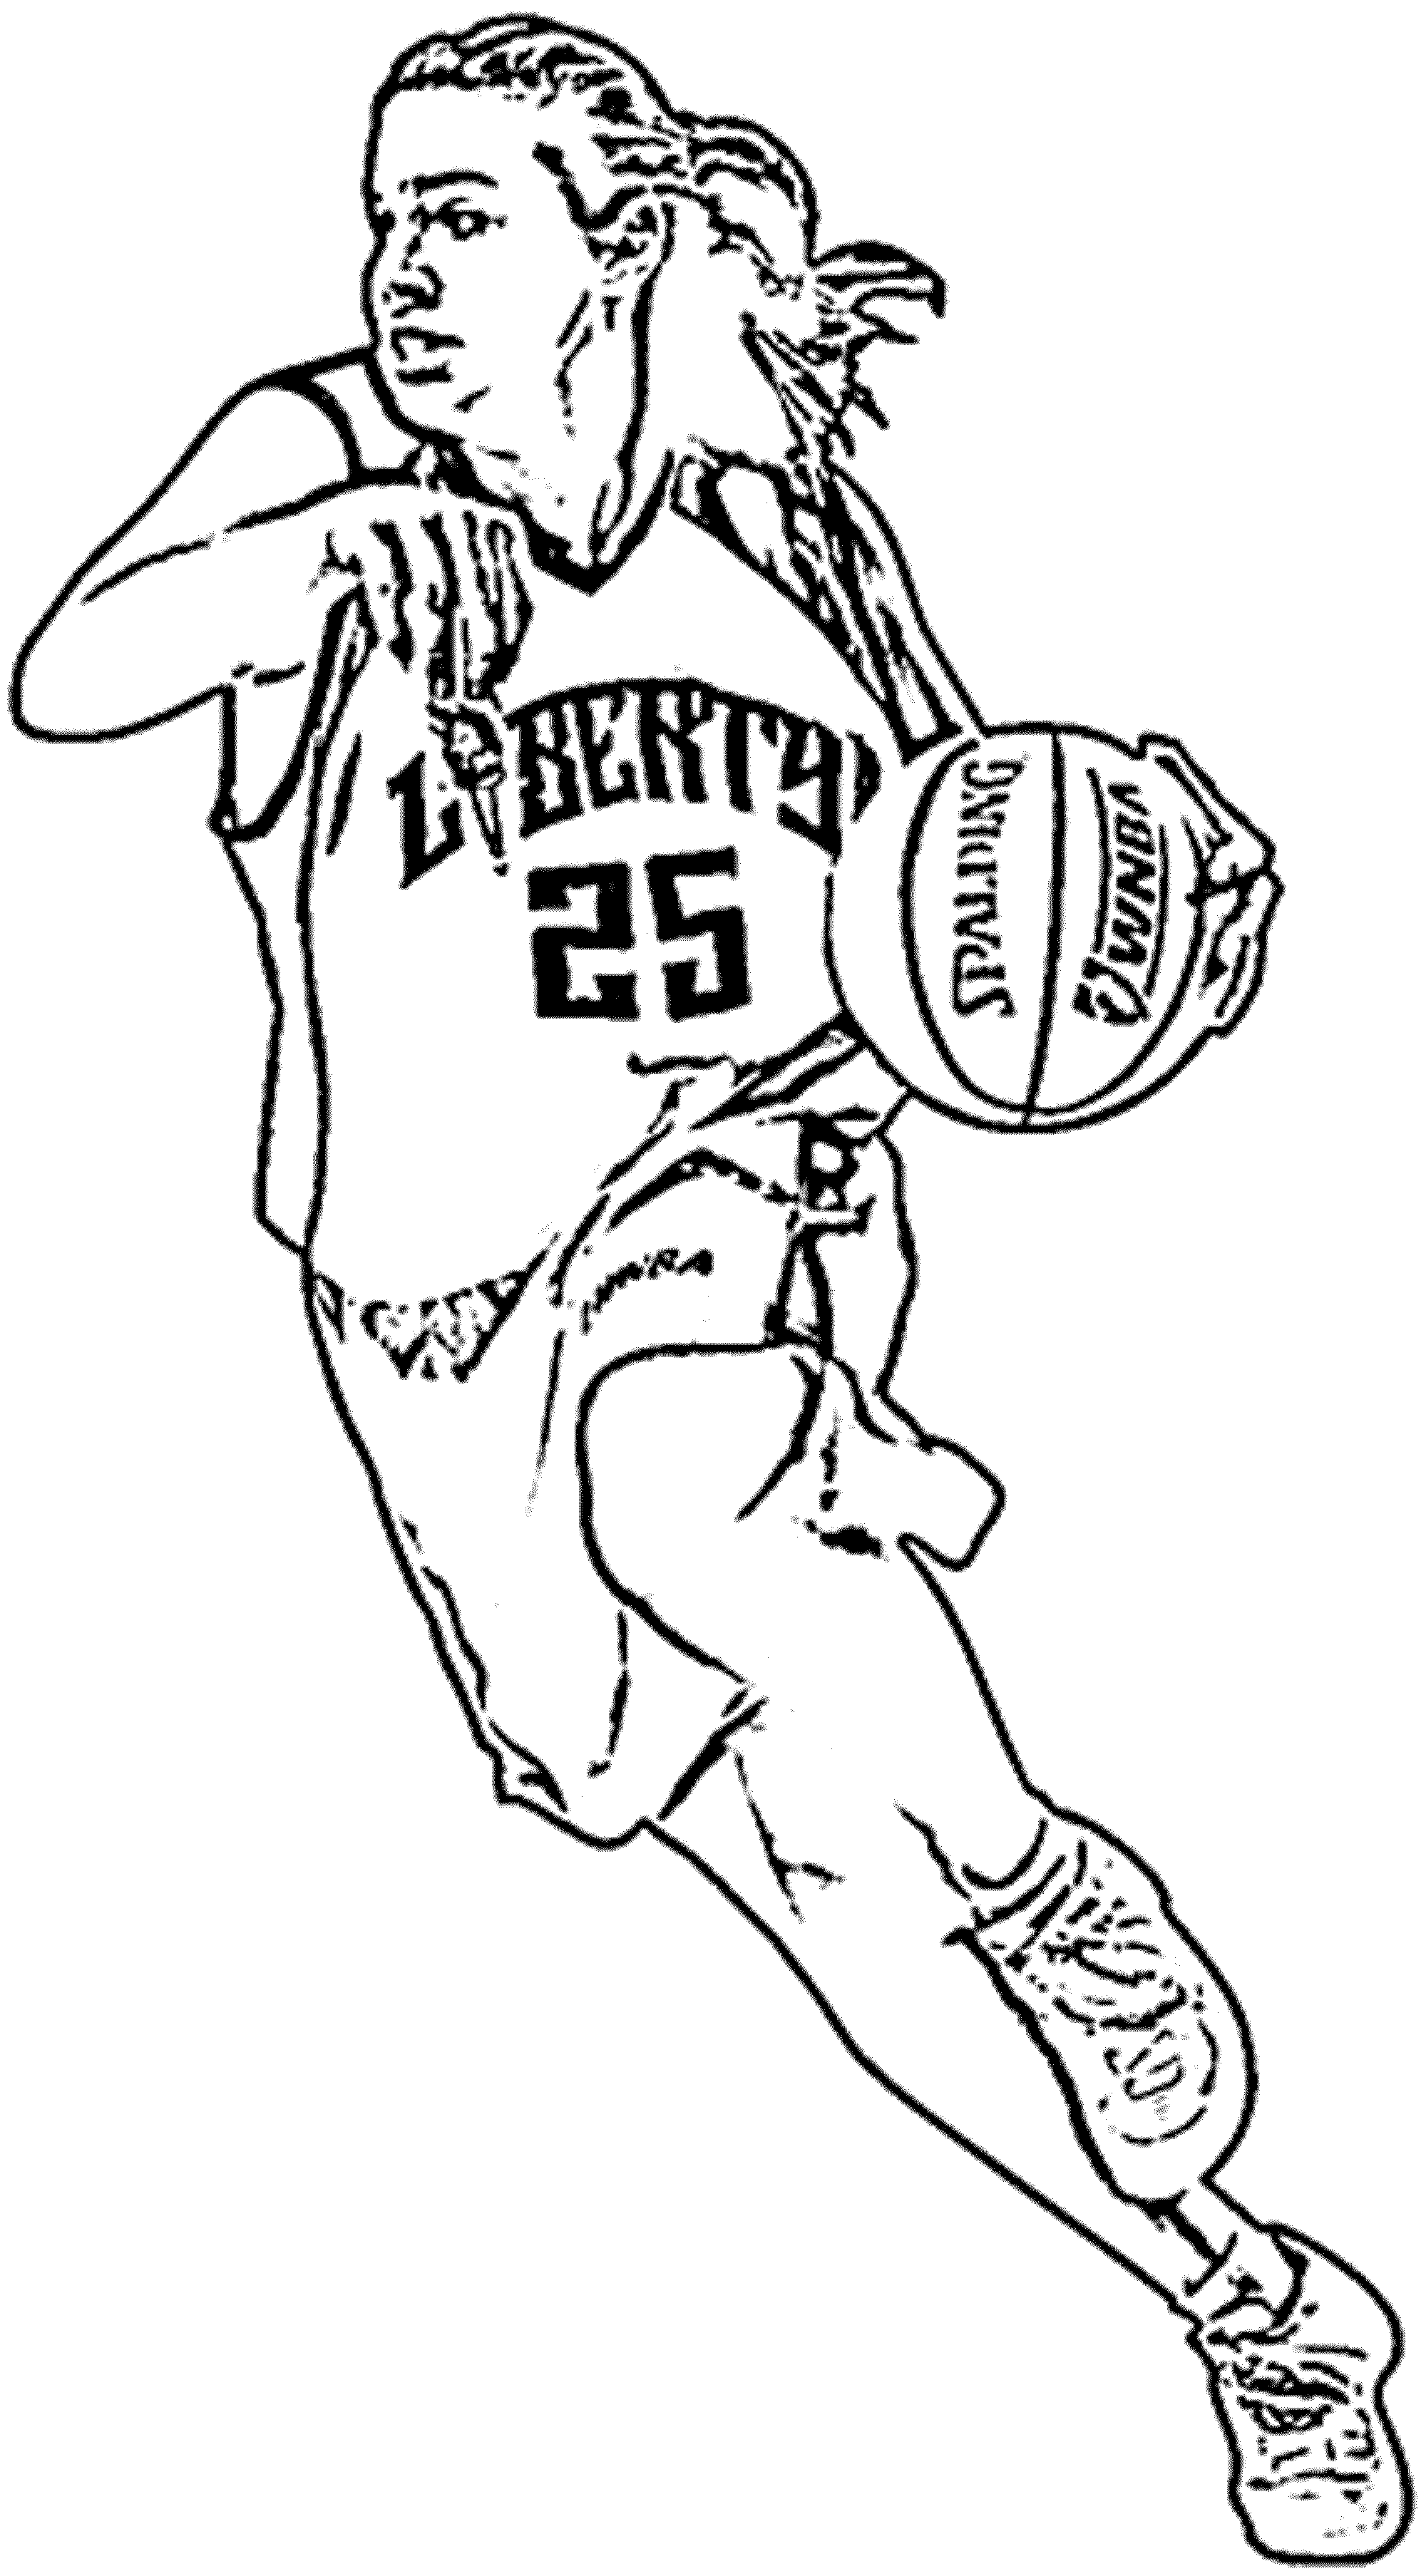 Print & Download - Interesting Basketball Coloring Pages